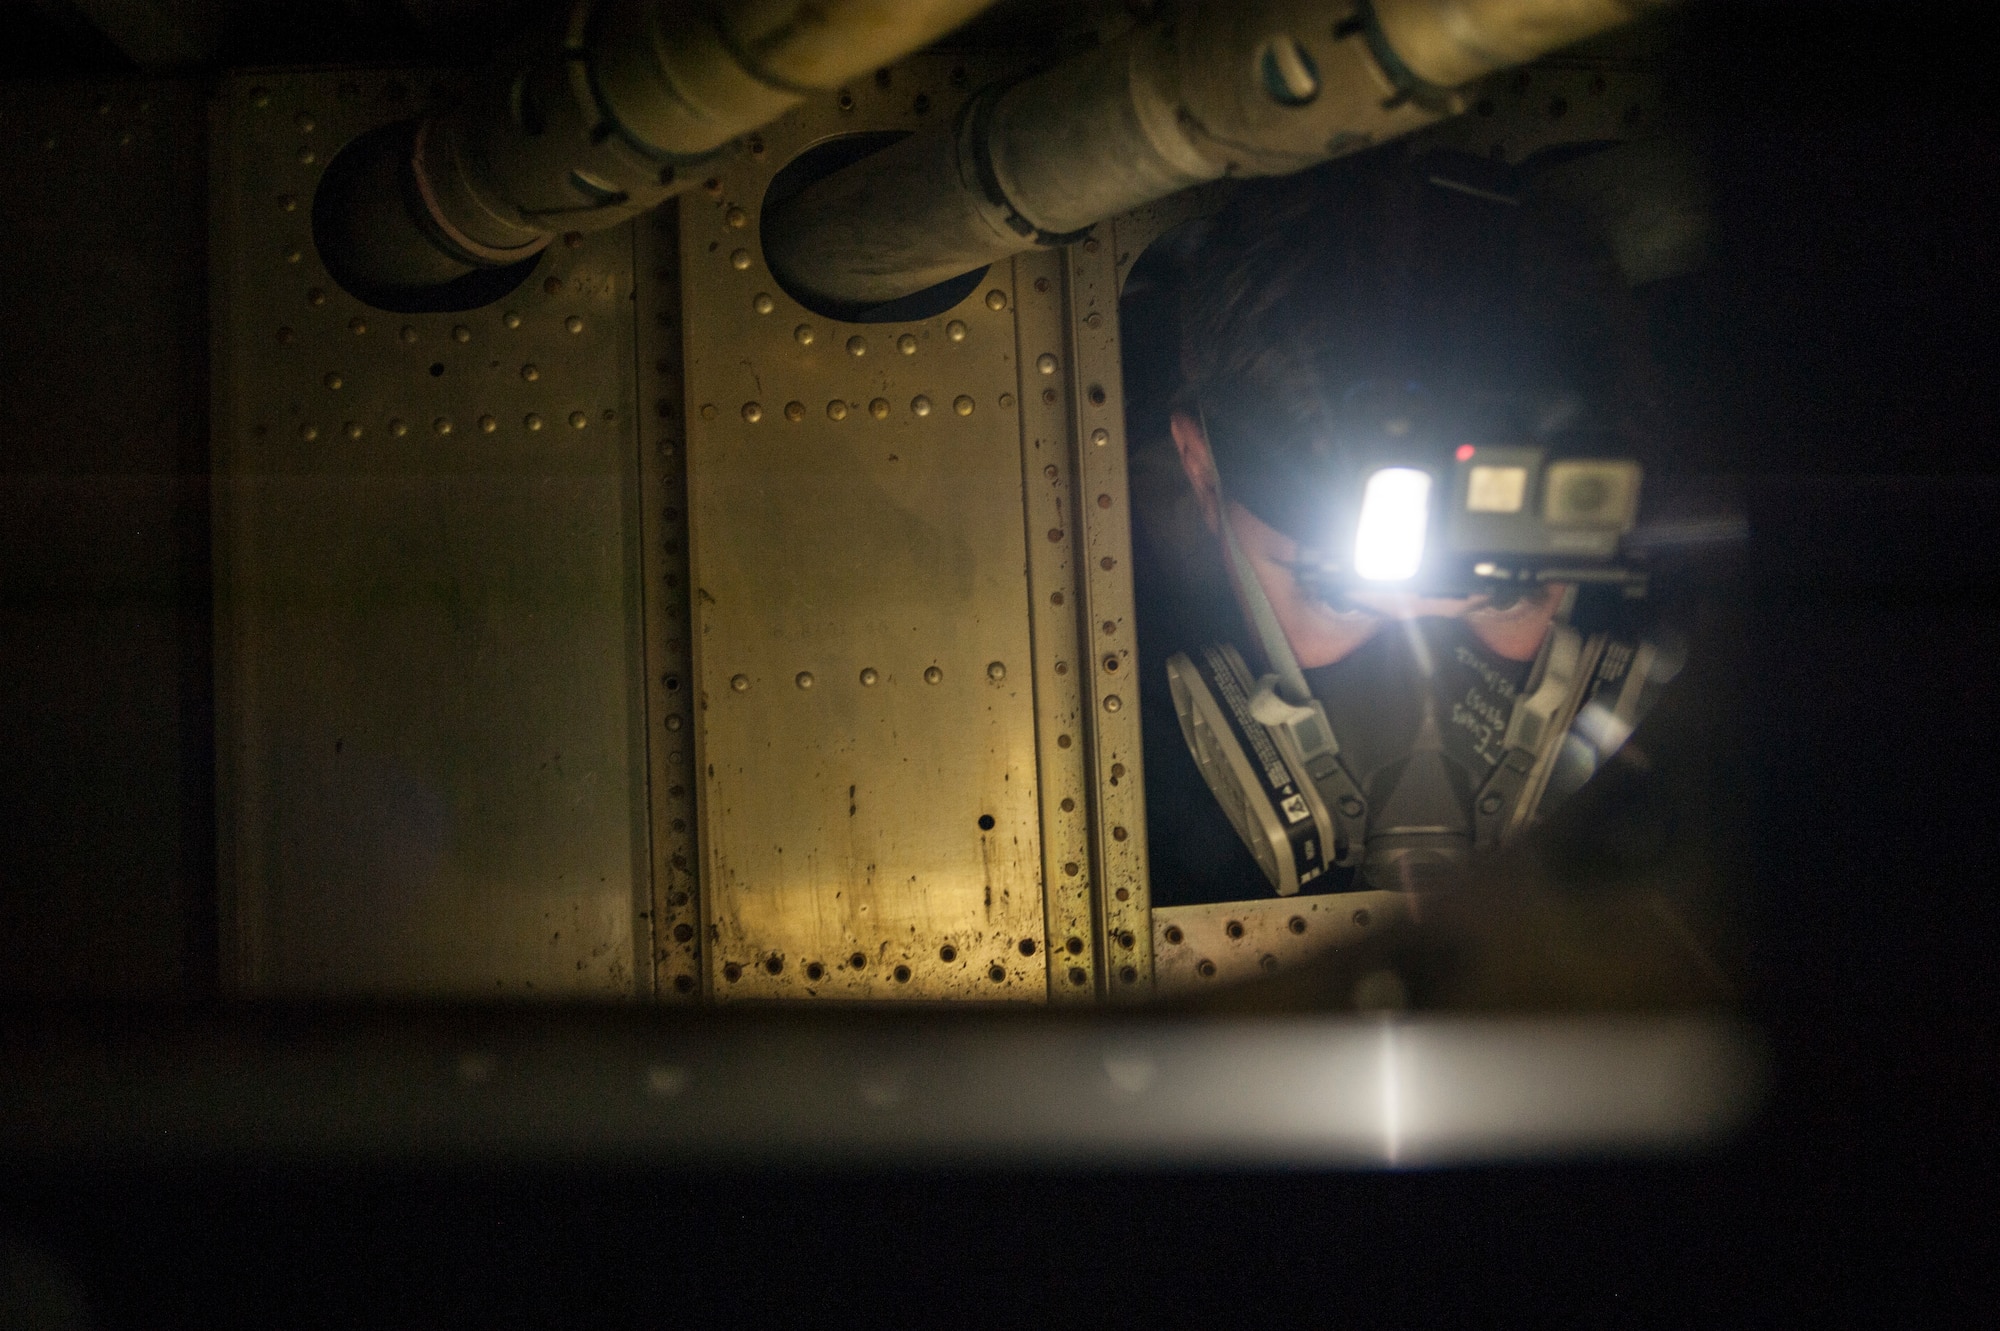 U.S. Air Force Senior Airman Triston Evans, an aircraft fuel systems journeyman assigned to the 6th Maintenance Squadron, squeezes through the interworking of a KC-135 Stratotanker training fuel cell at MacDill Air Force Base, Fla., May 30, 2018.